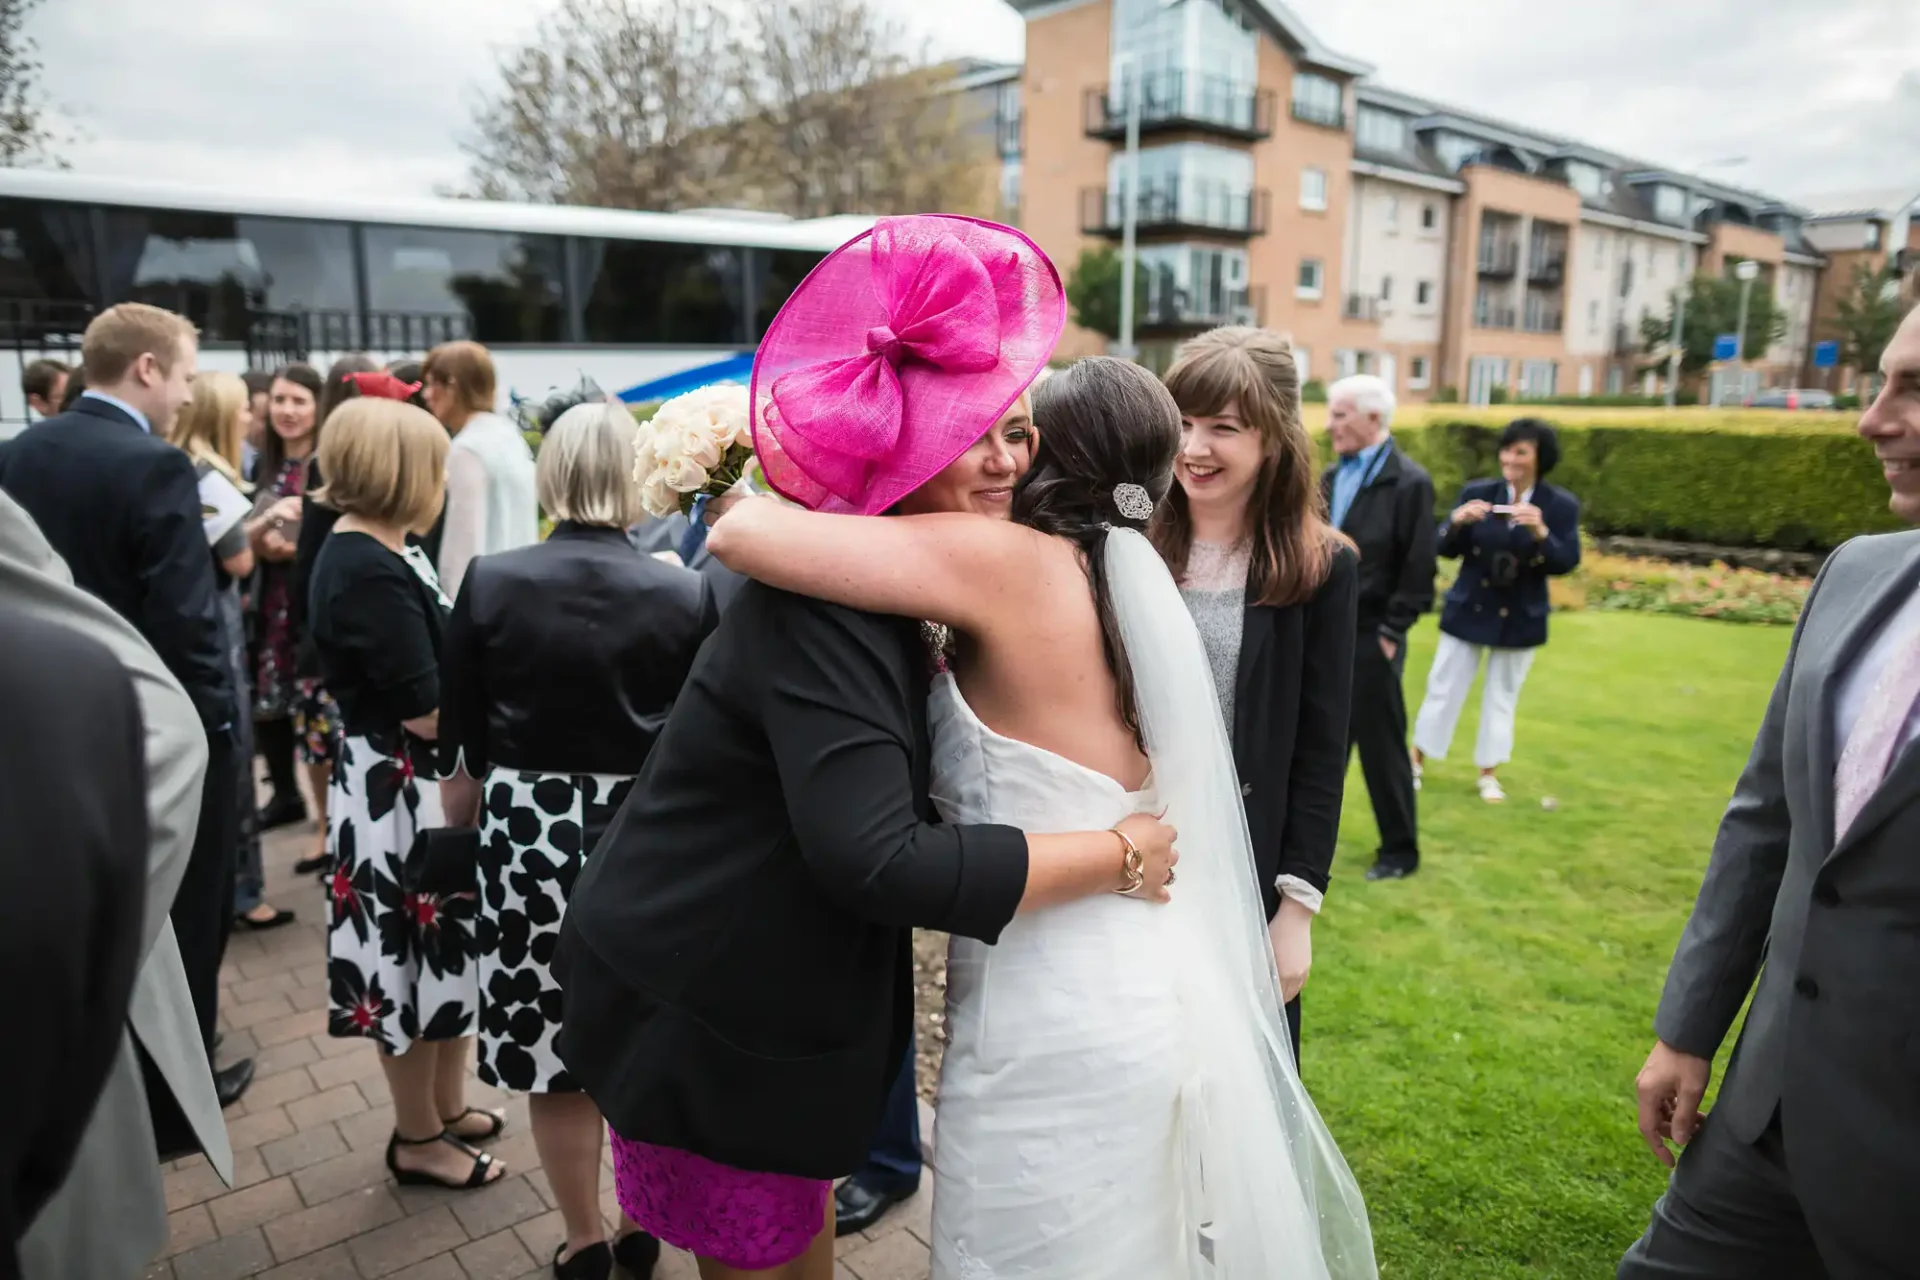 A bride in a white dress embracing a woman in a bright pink hat at a wedding, with guests nearby.